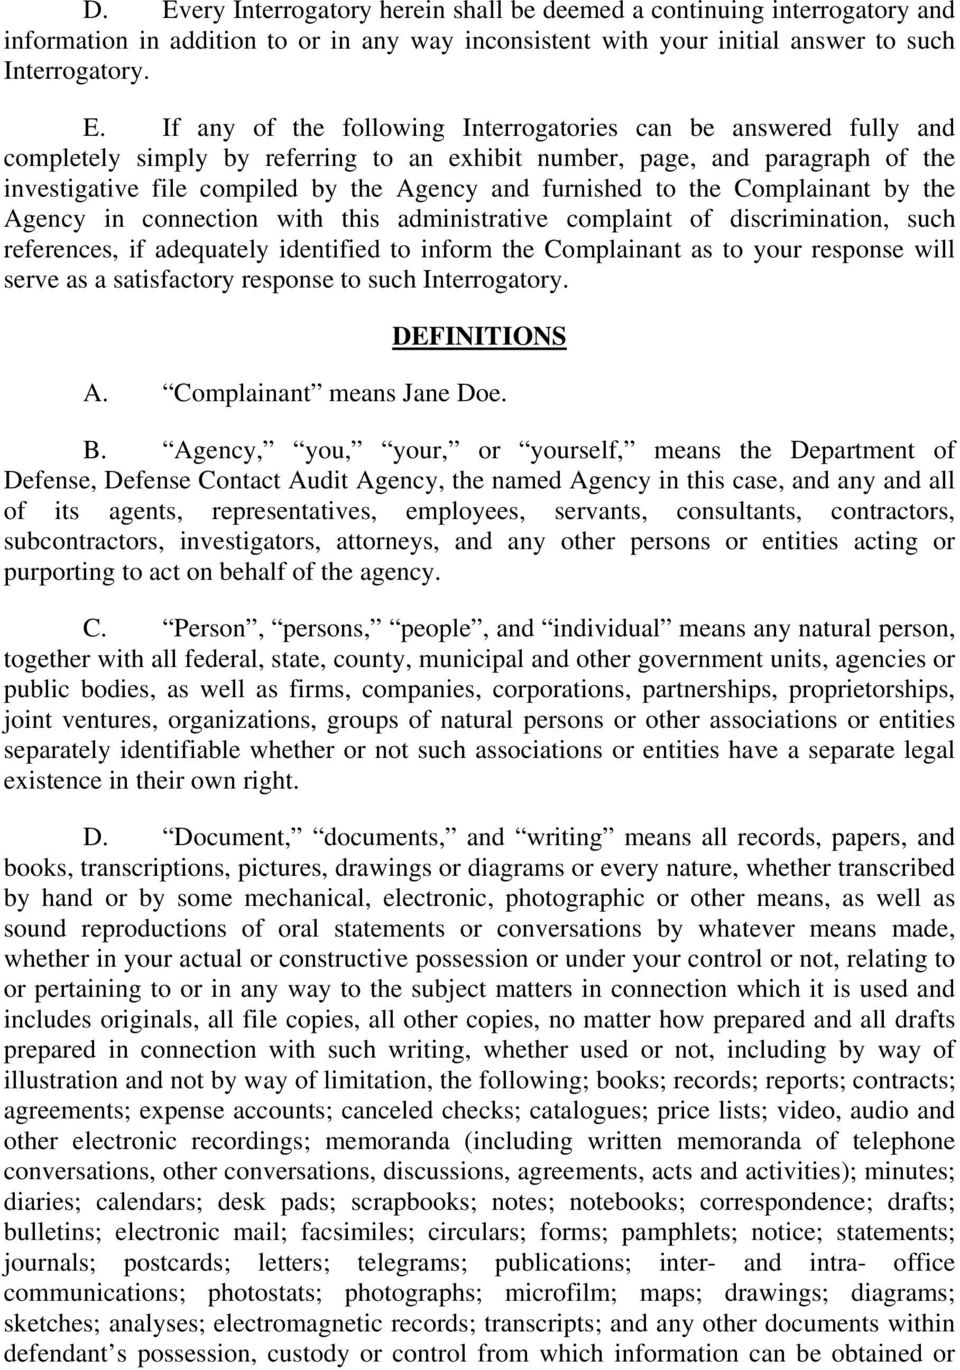 Complainant by the Agency in connection with this administrative complaint of discrimination, such references, if adequately identified to inform the Complainant as to your response will serve as a